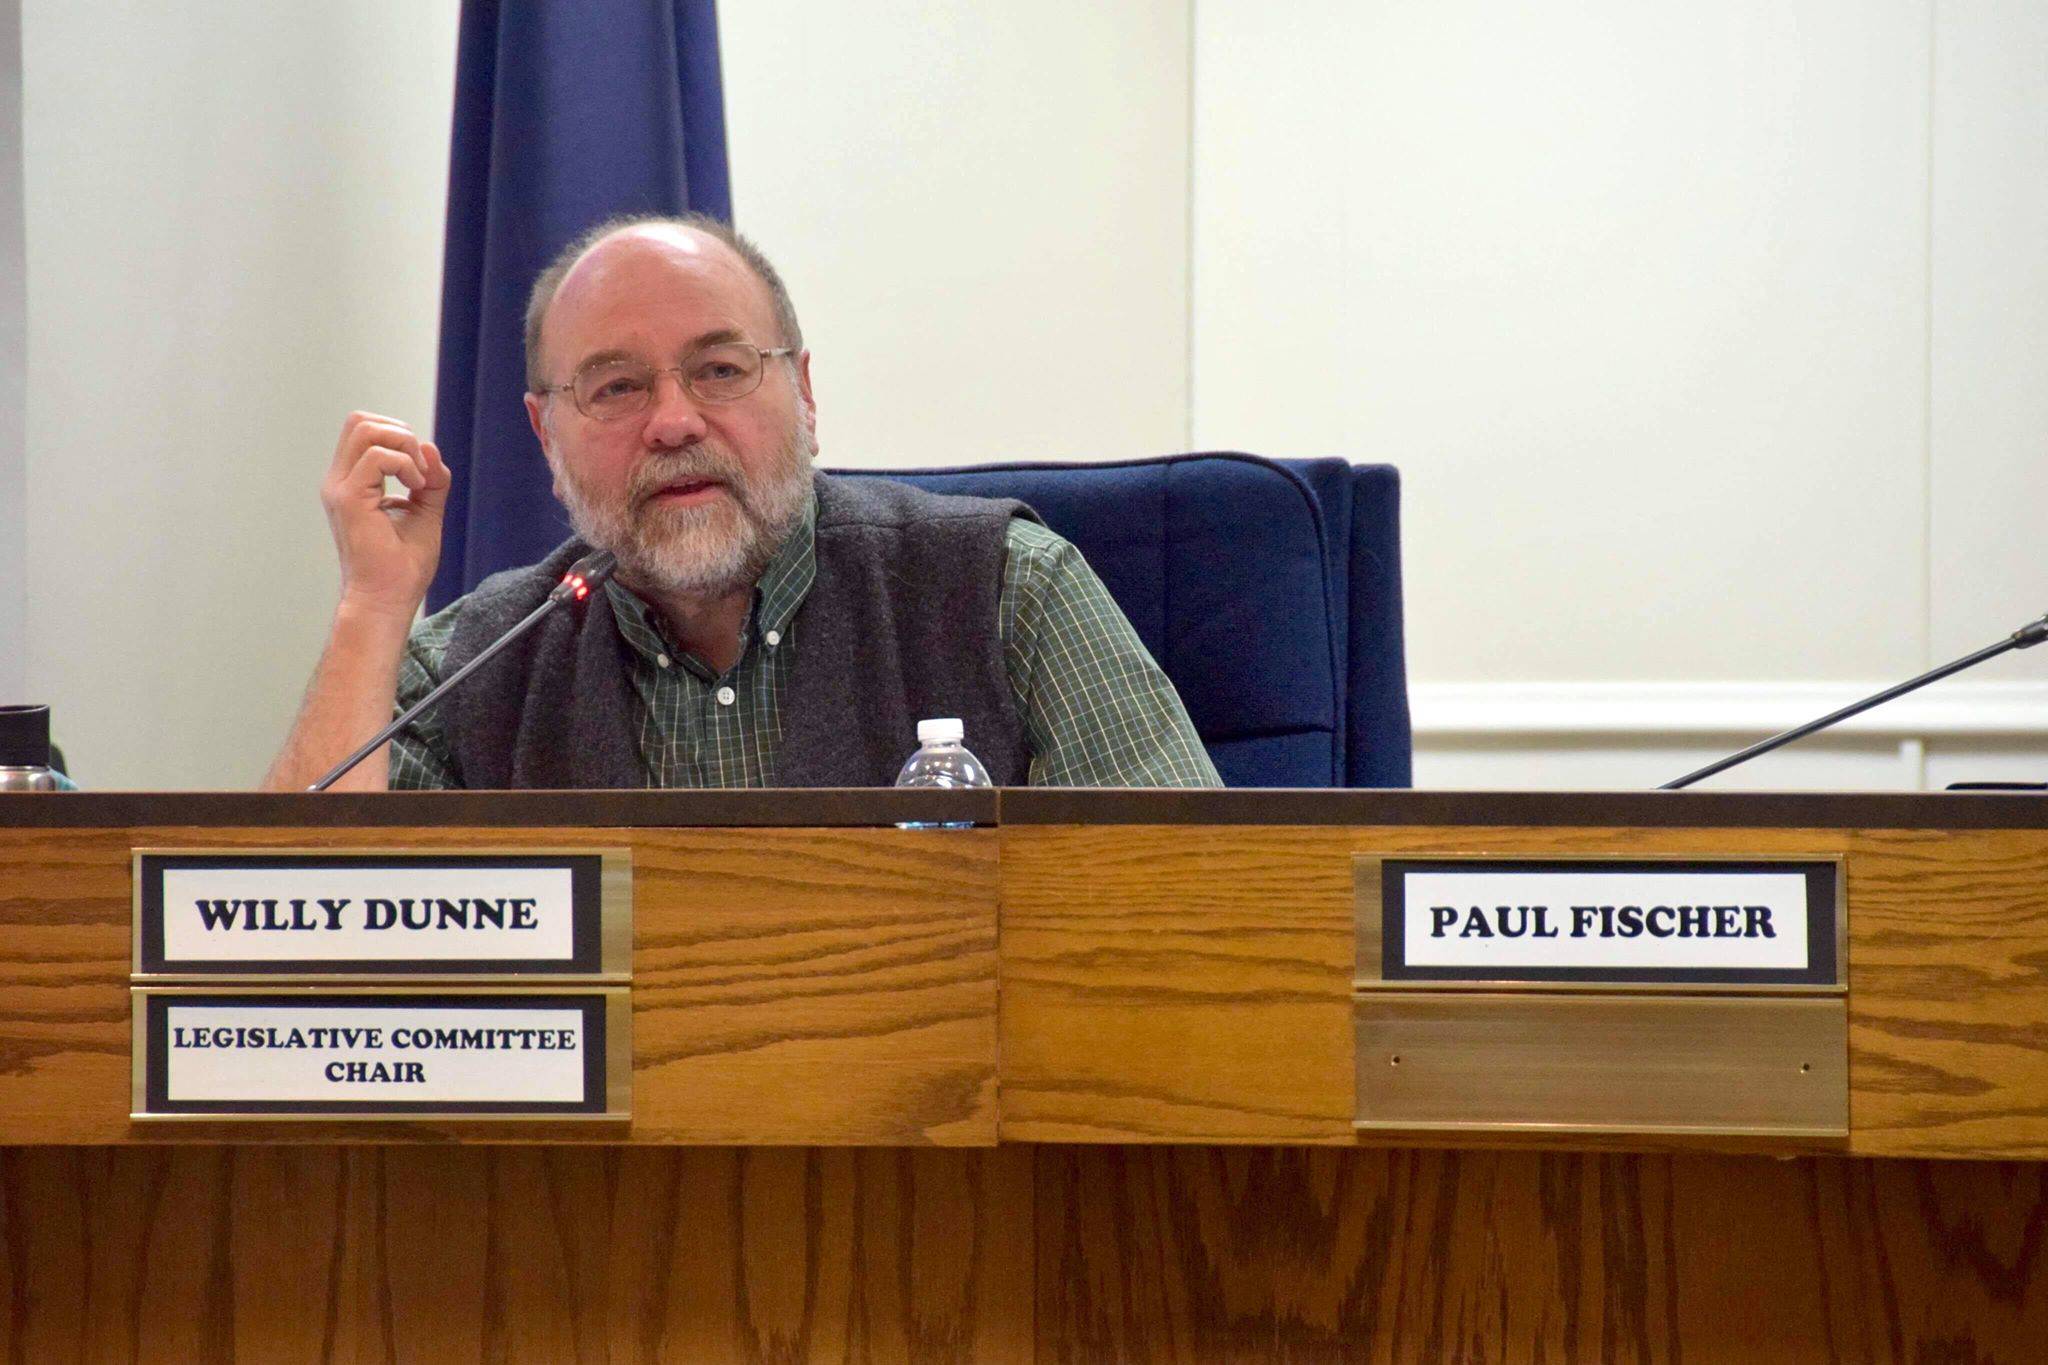 Assembly member Willy Dunne, speaks in support of education at the Tuesday, Feb. 5, 2019, Kenai Peninsula Borough Assembly meeting in Soldotna, Alaska. (Photo by Brian Mazurek/Peninsula Clarion)